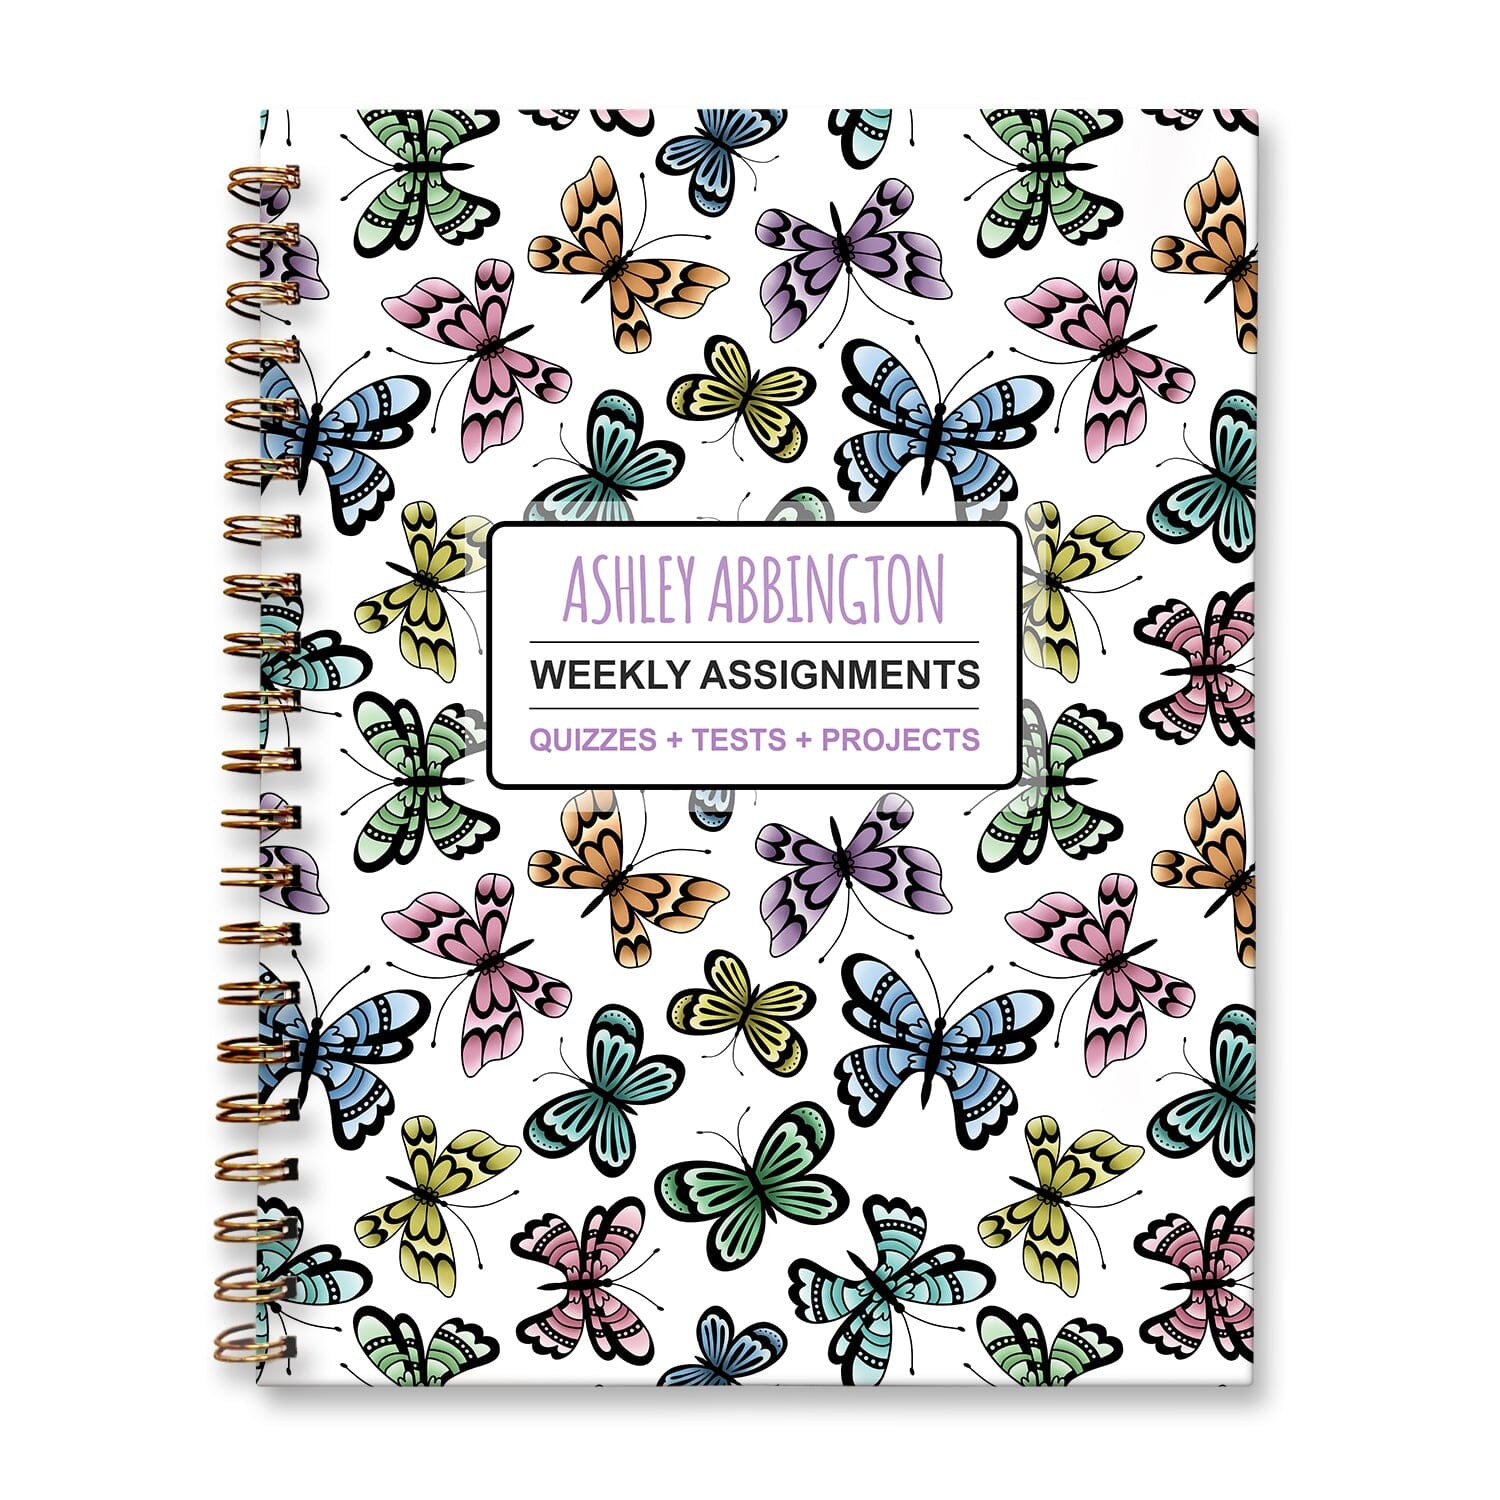 Personalized Pretty Butterfly Weekly Assignments Book for students to track their homework, quizzes and tests, and projects every week for school. 